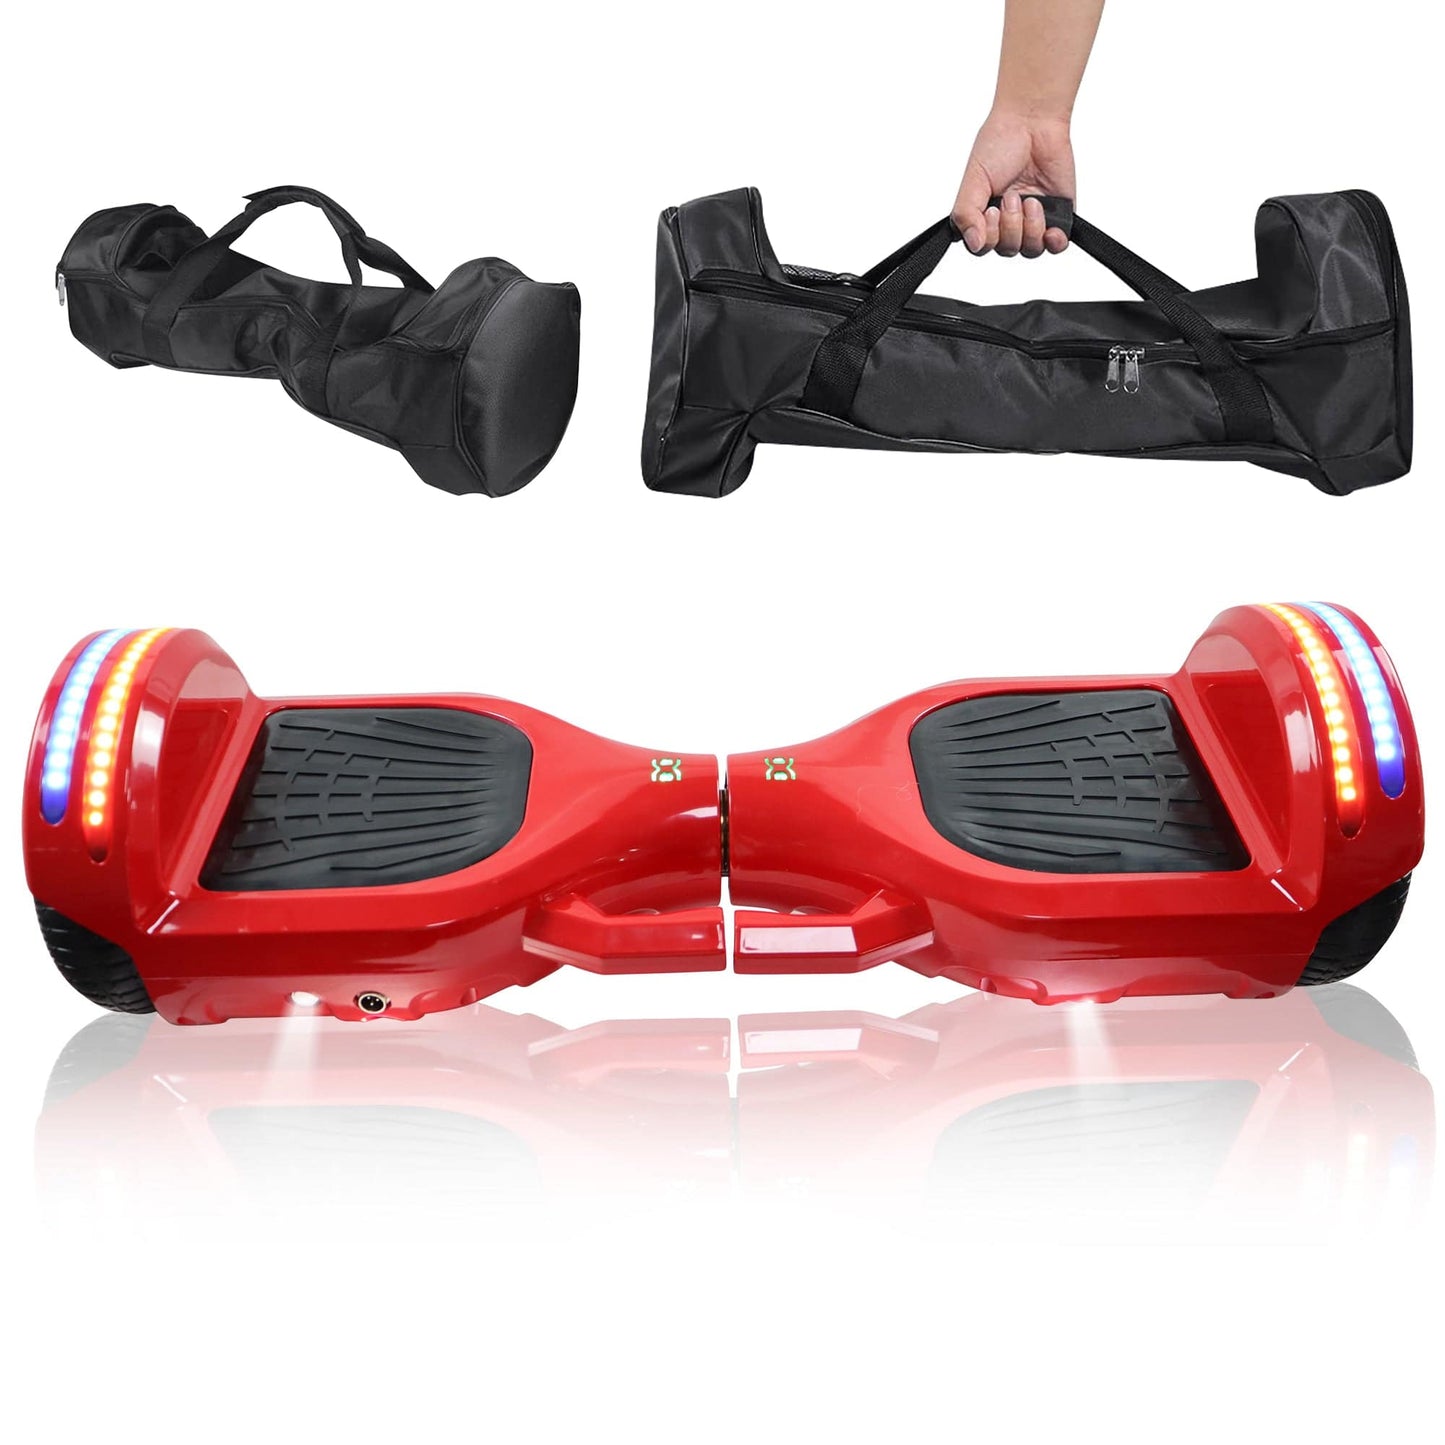 COOLBABY PHC 6.5" Electric Hoverboard with LED Light and beg - COOLBABY